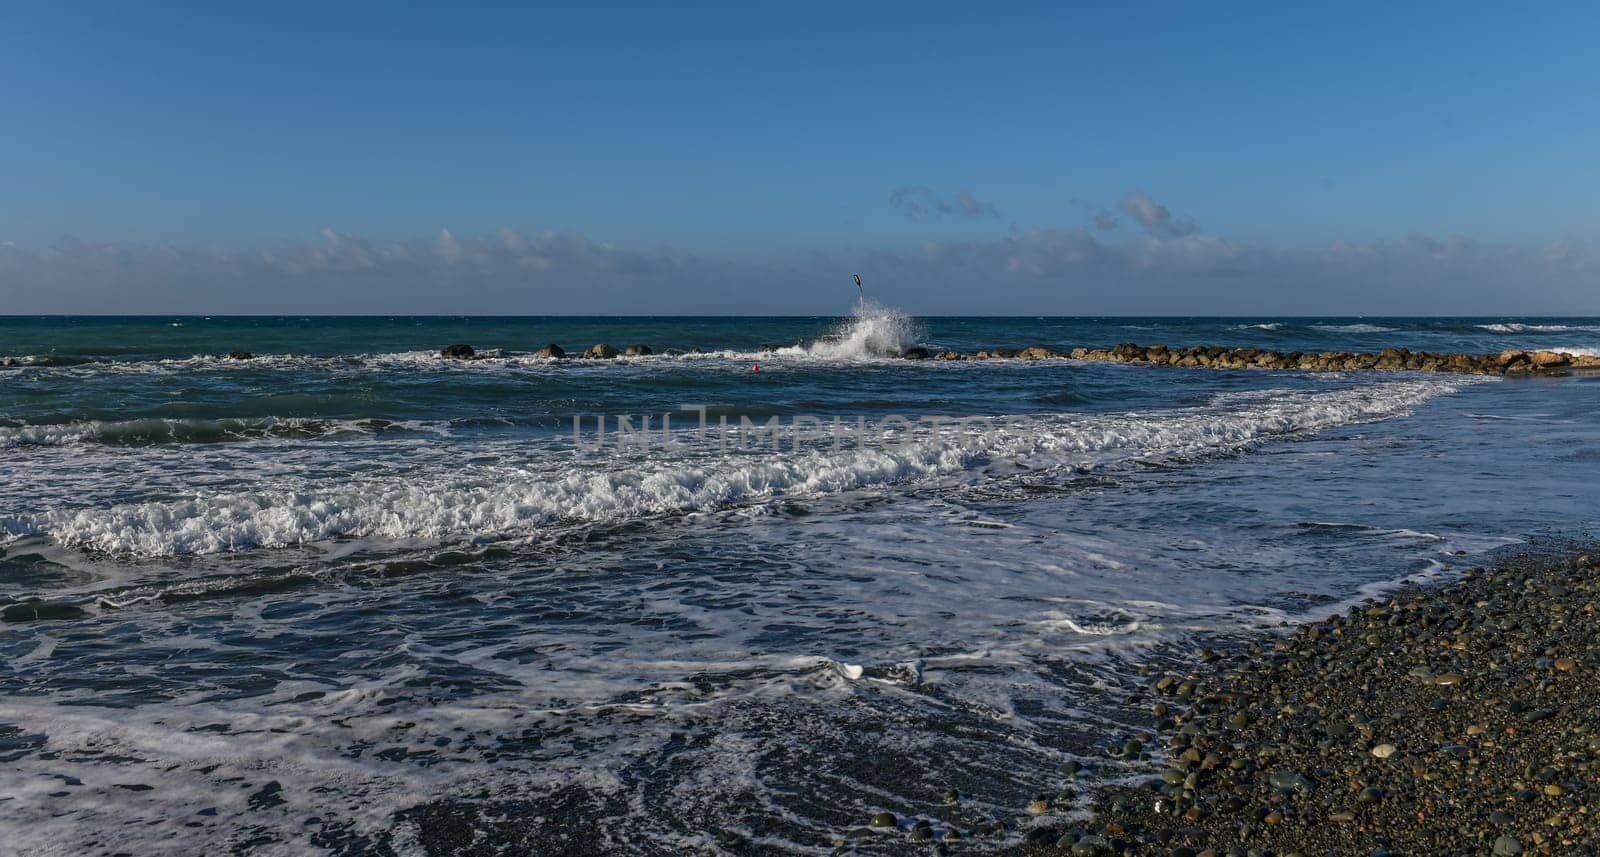 waves on the beach of the Mediterranean sea